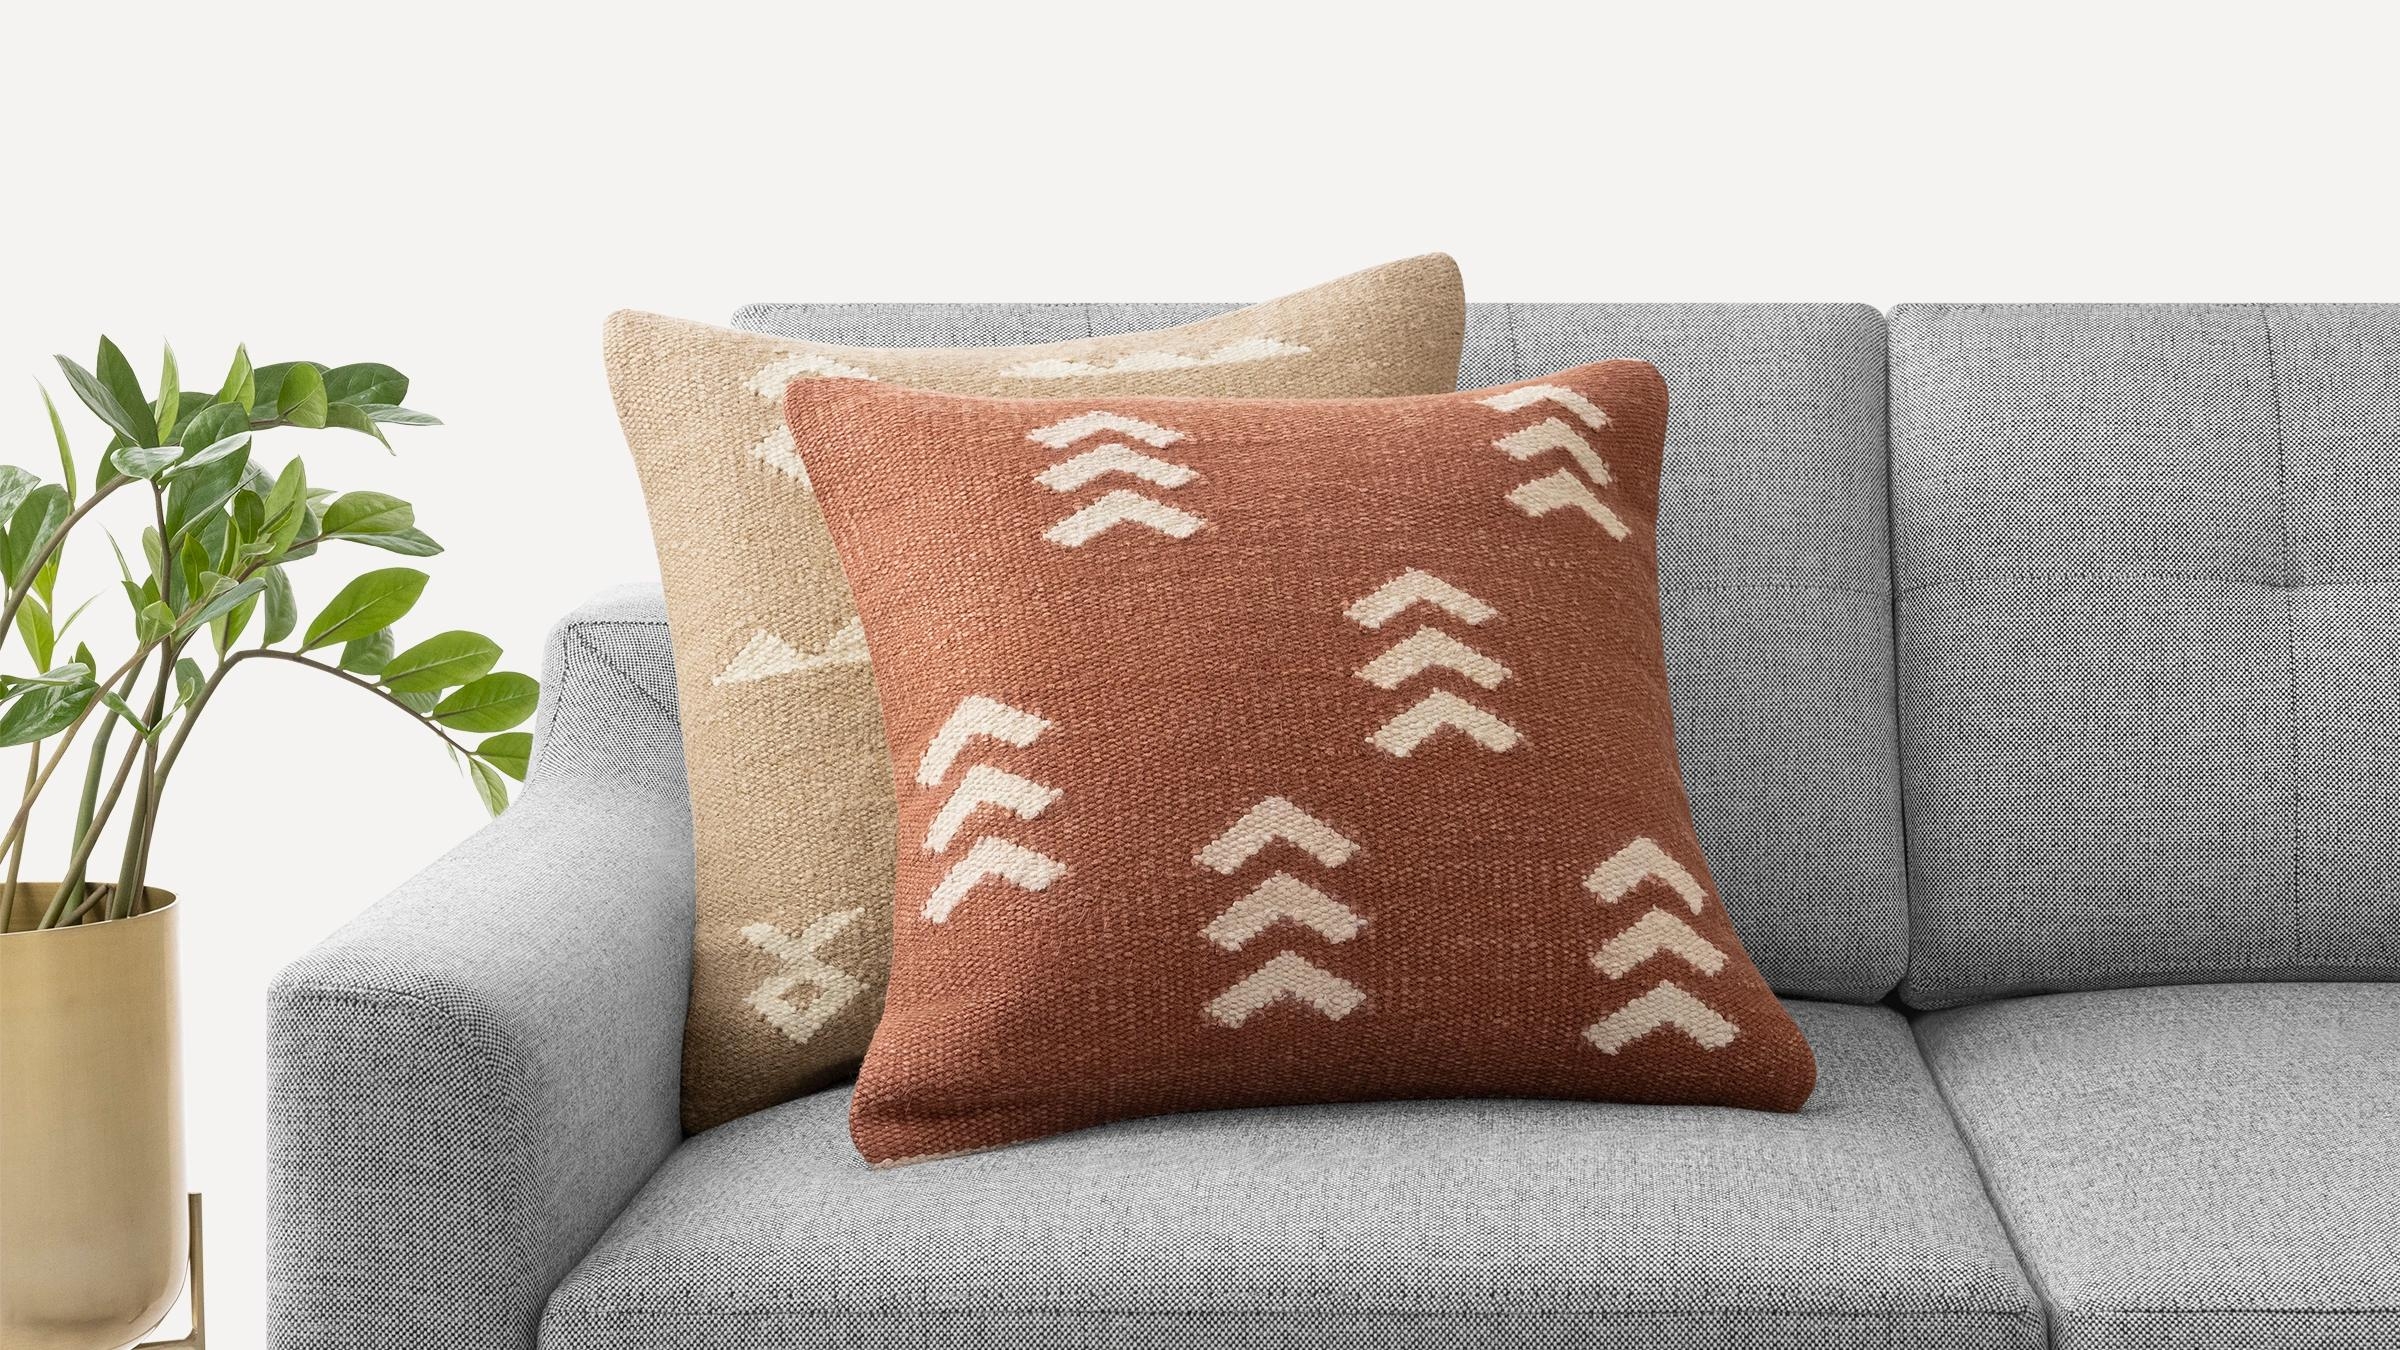 Chevron Hand-tufted Pillow Cover in Brick Red - Image 3